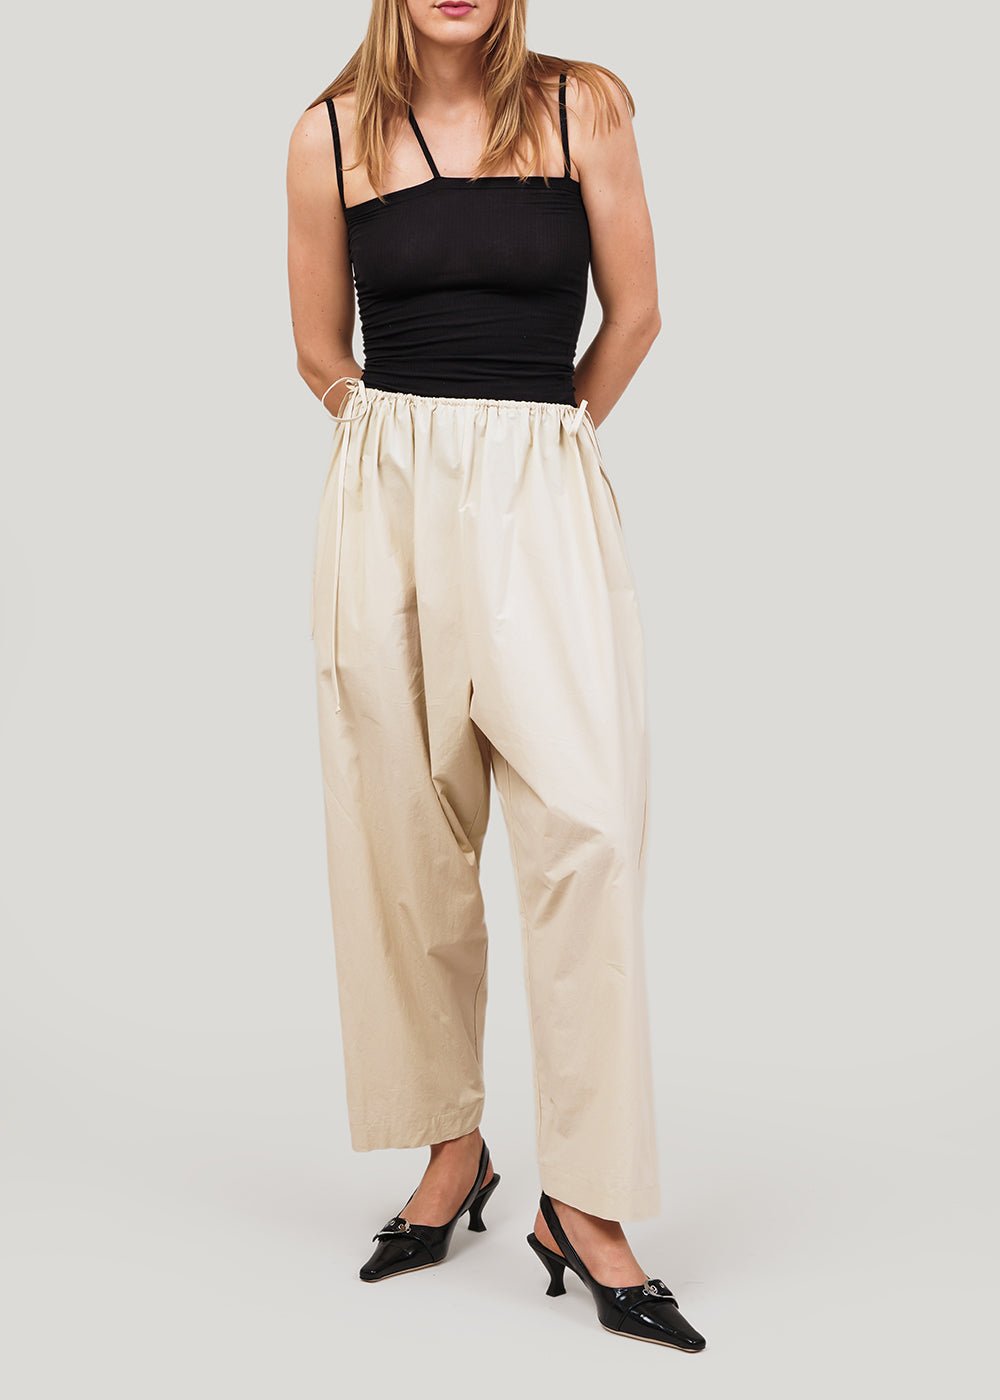 Modern Weaving Parchment Balloon Pant - New Classics Studios Sustainable Ethical Fashion Canada